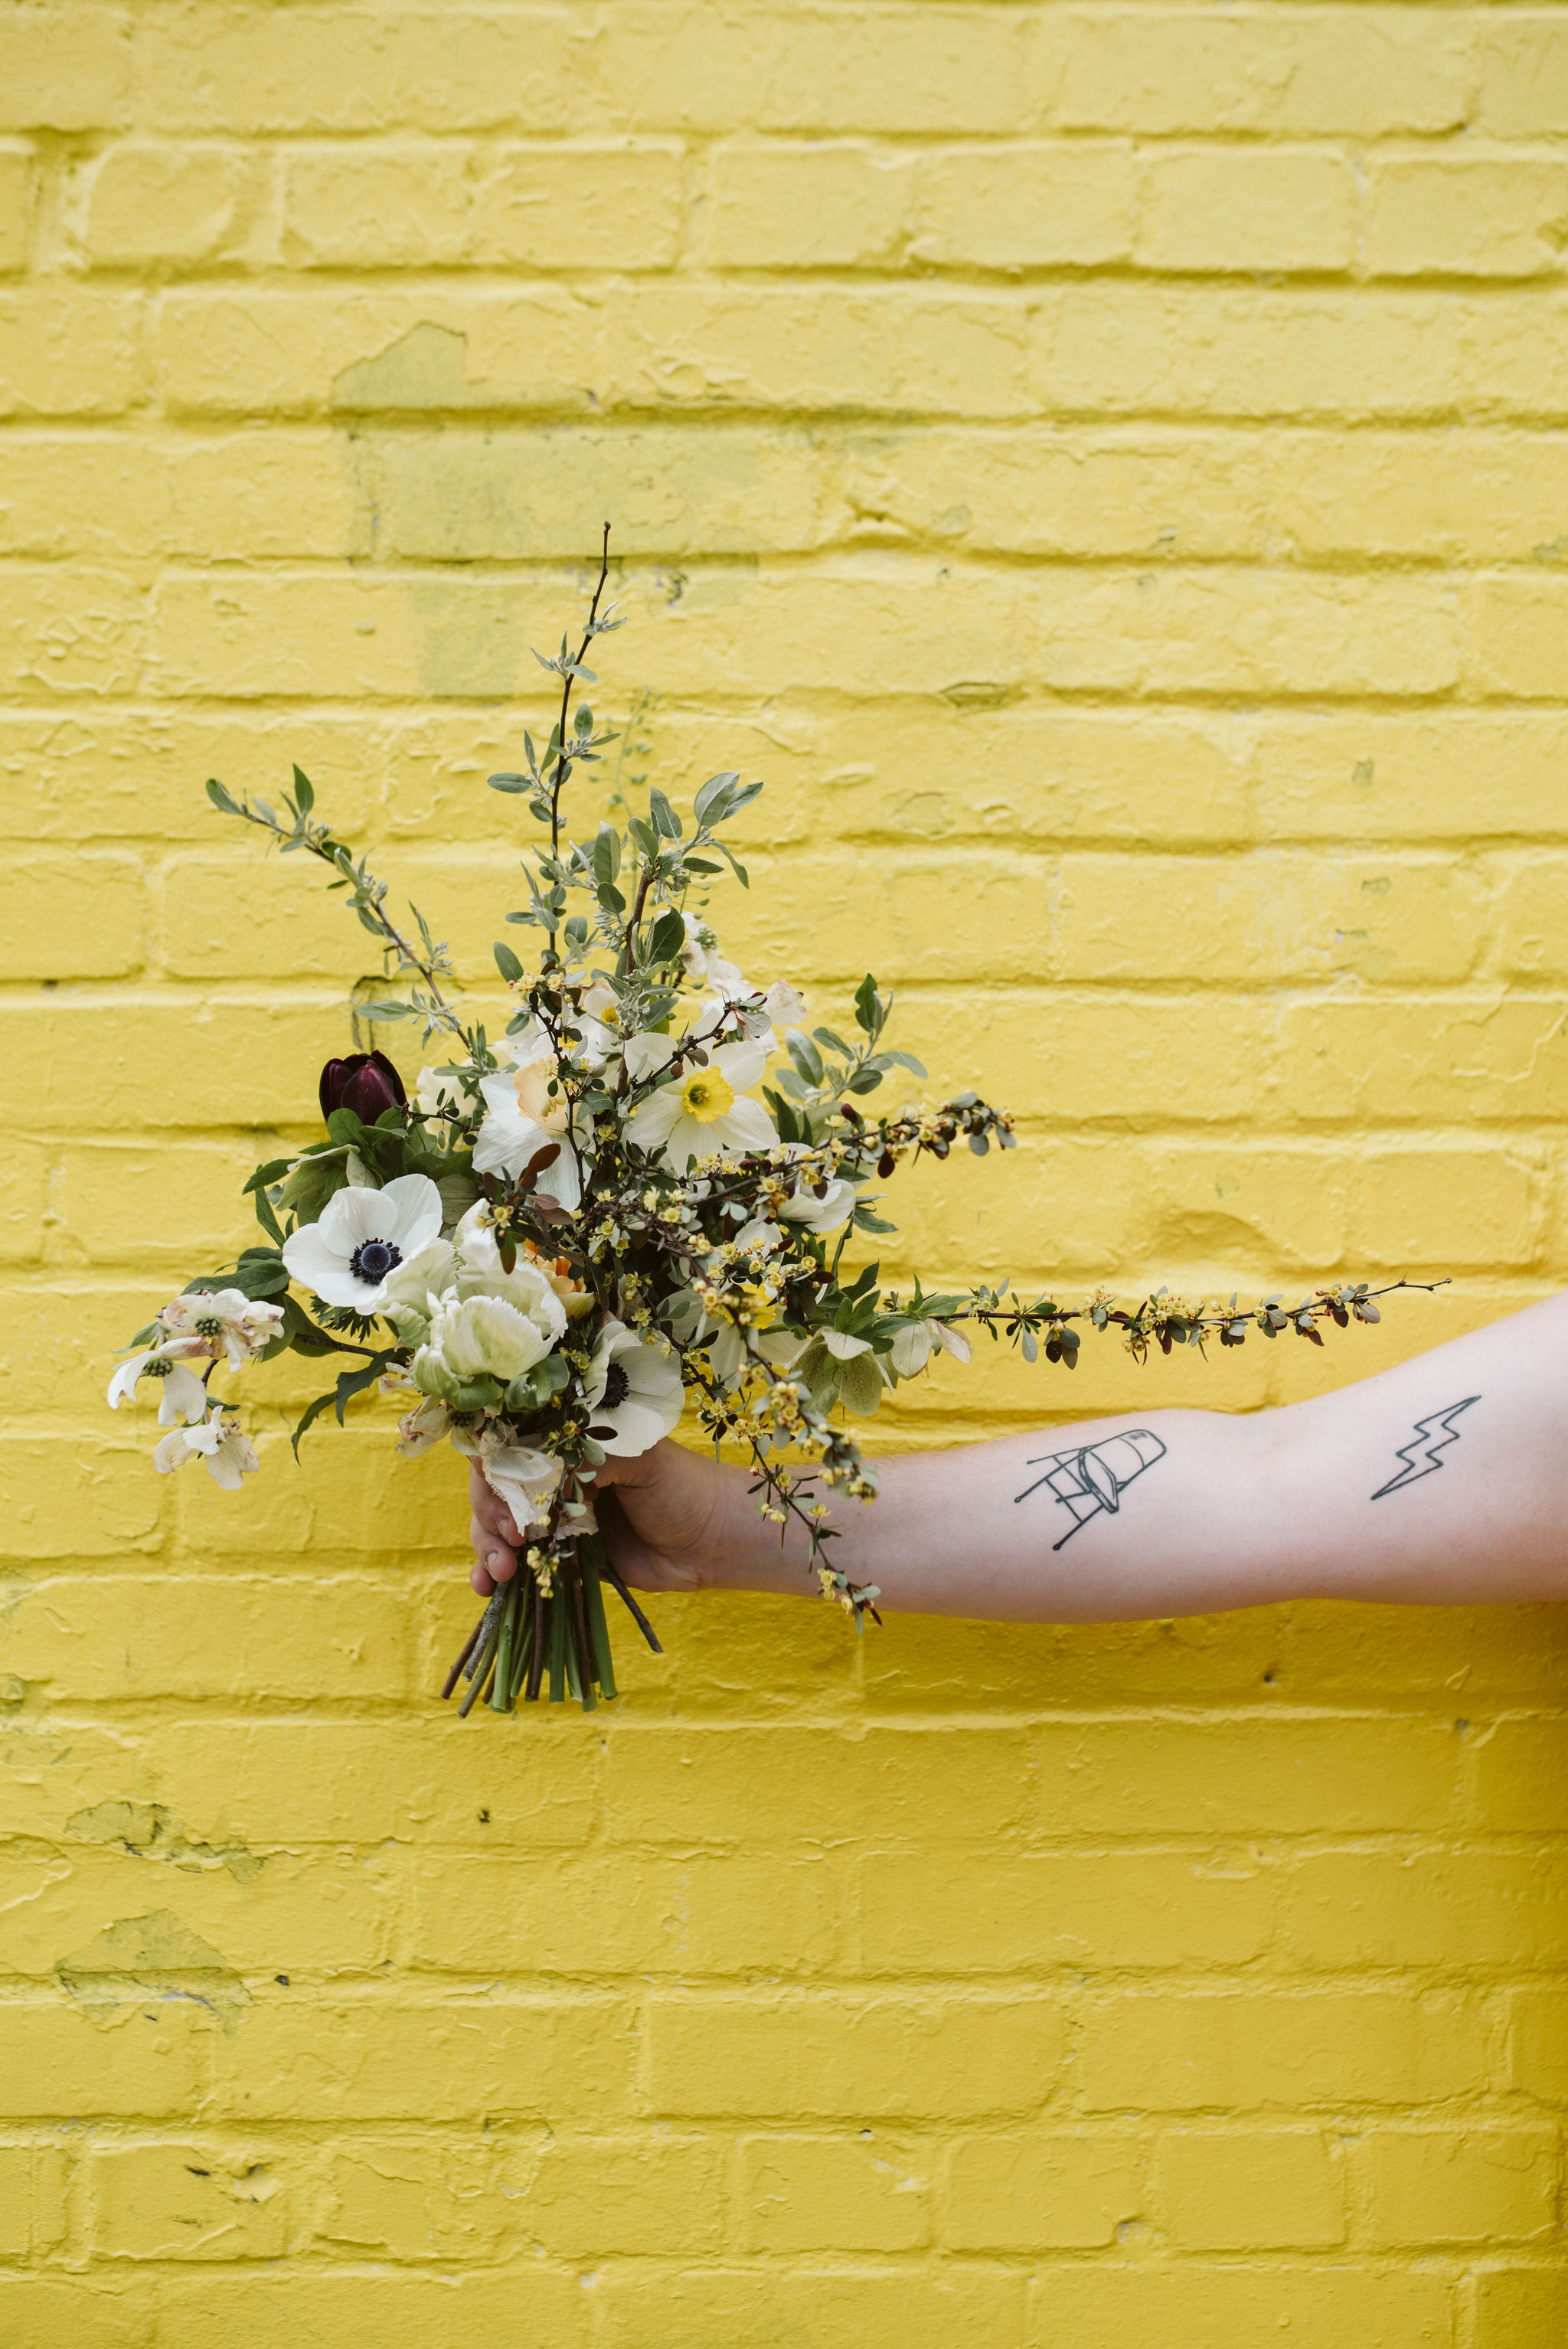  Washington DC, Baltimore Wedding Photographer, Alexandria, Old Town, Jewel Tone, Romantic, Modern, Tattoos, Bride holding out bouquet in front of brick wall, White anemones and tulips 